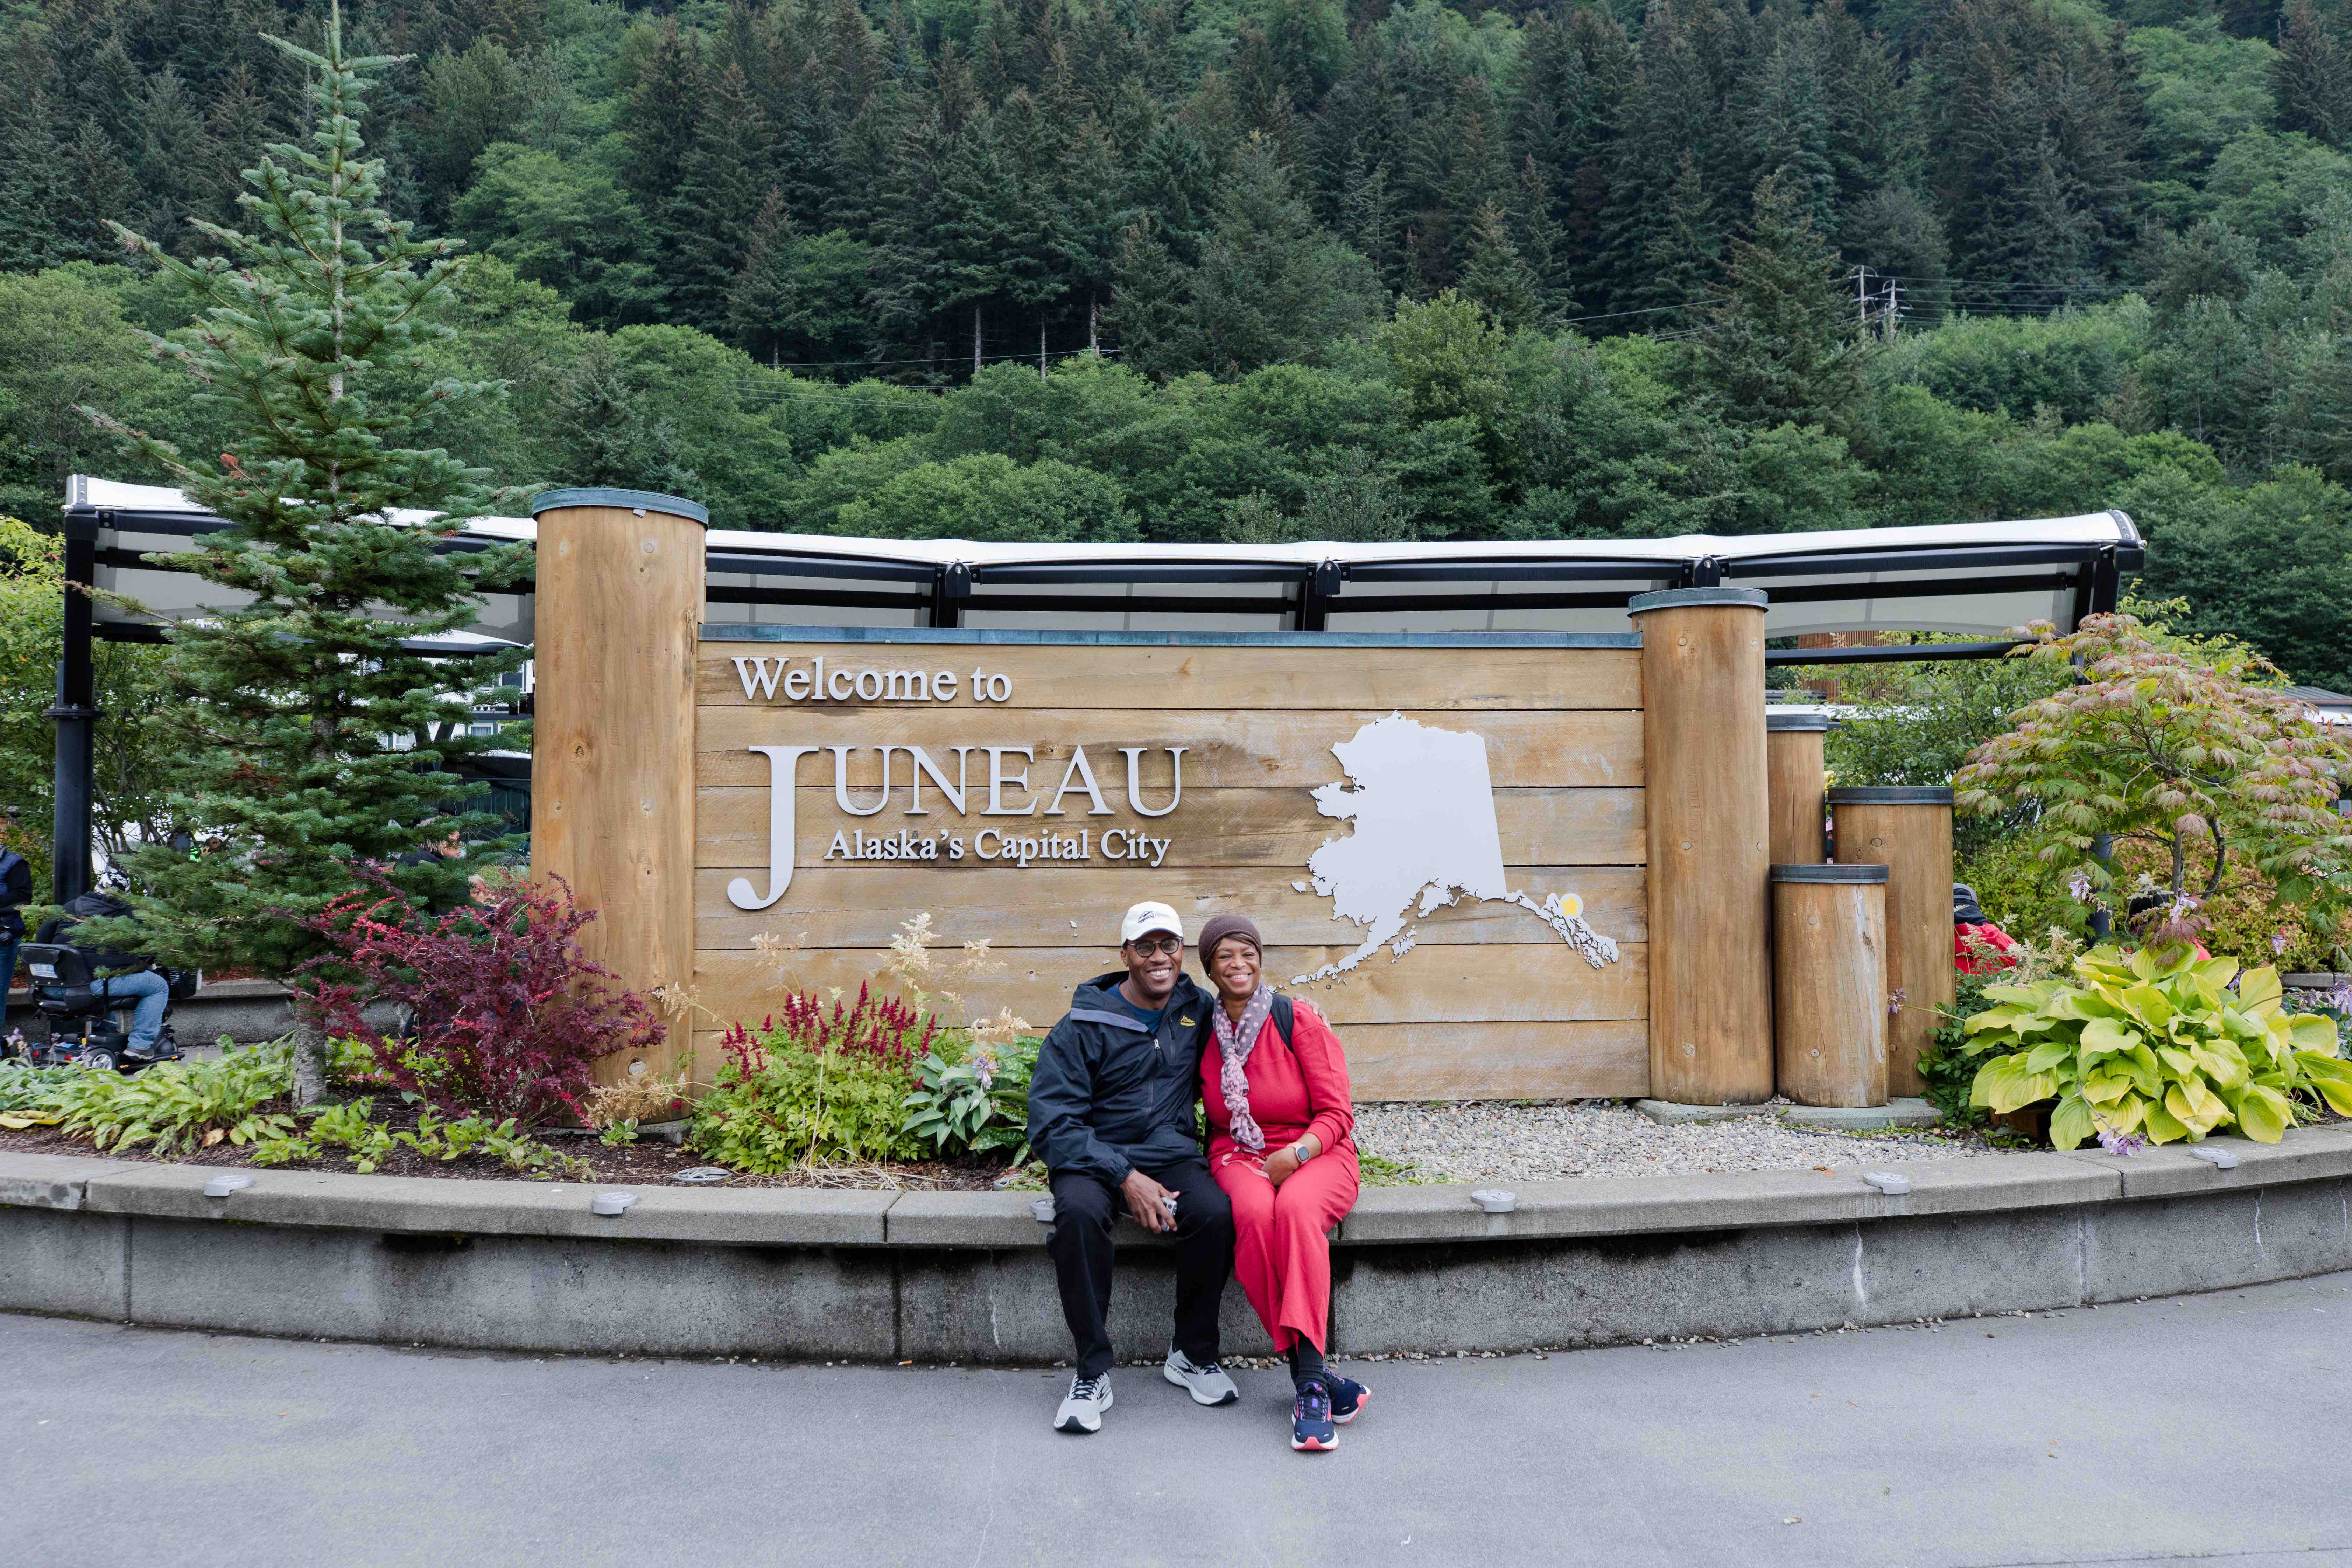 Inspiration travelers sitting in front of sign that says "Welcome to Juneau, Alaska's Capital City"